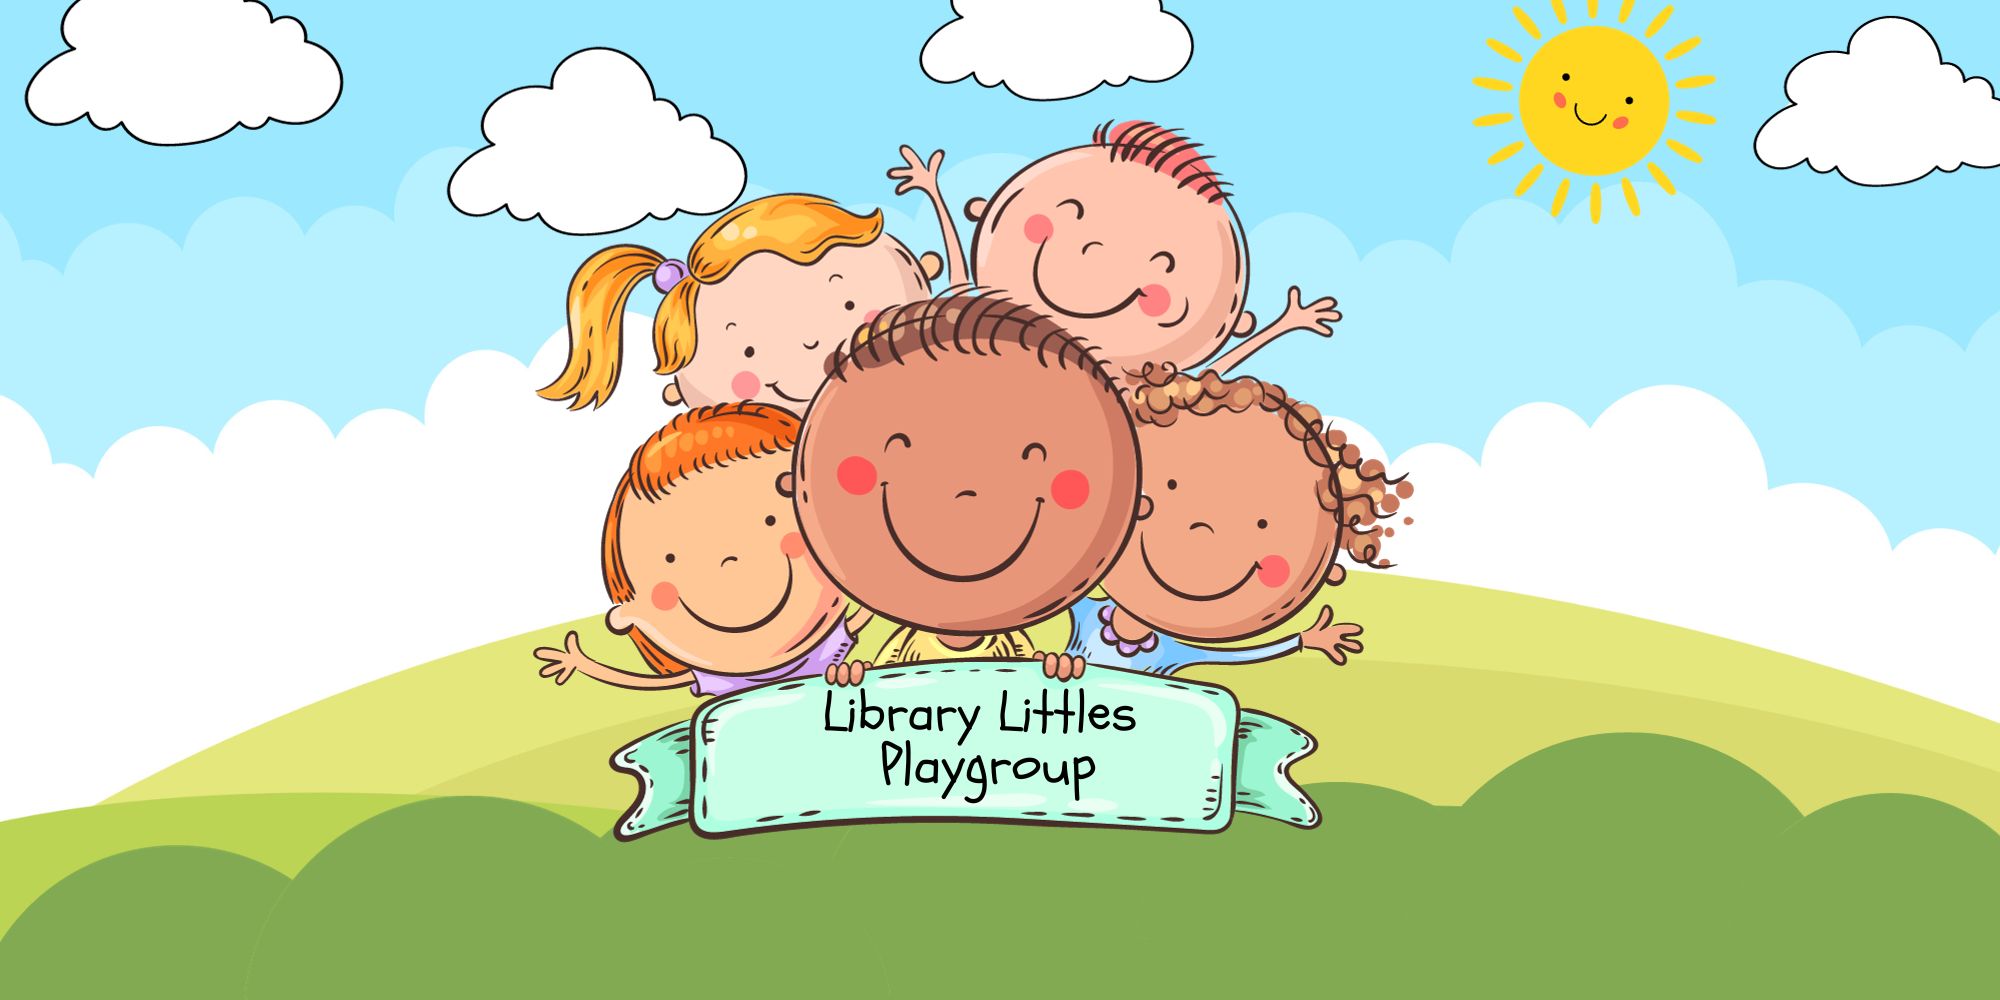 Library Littles Playgroup